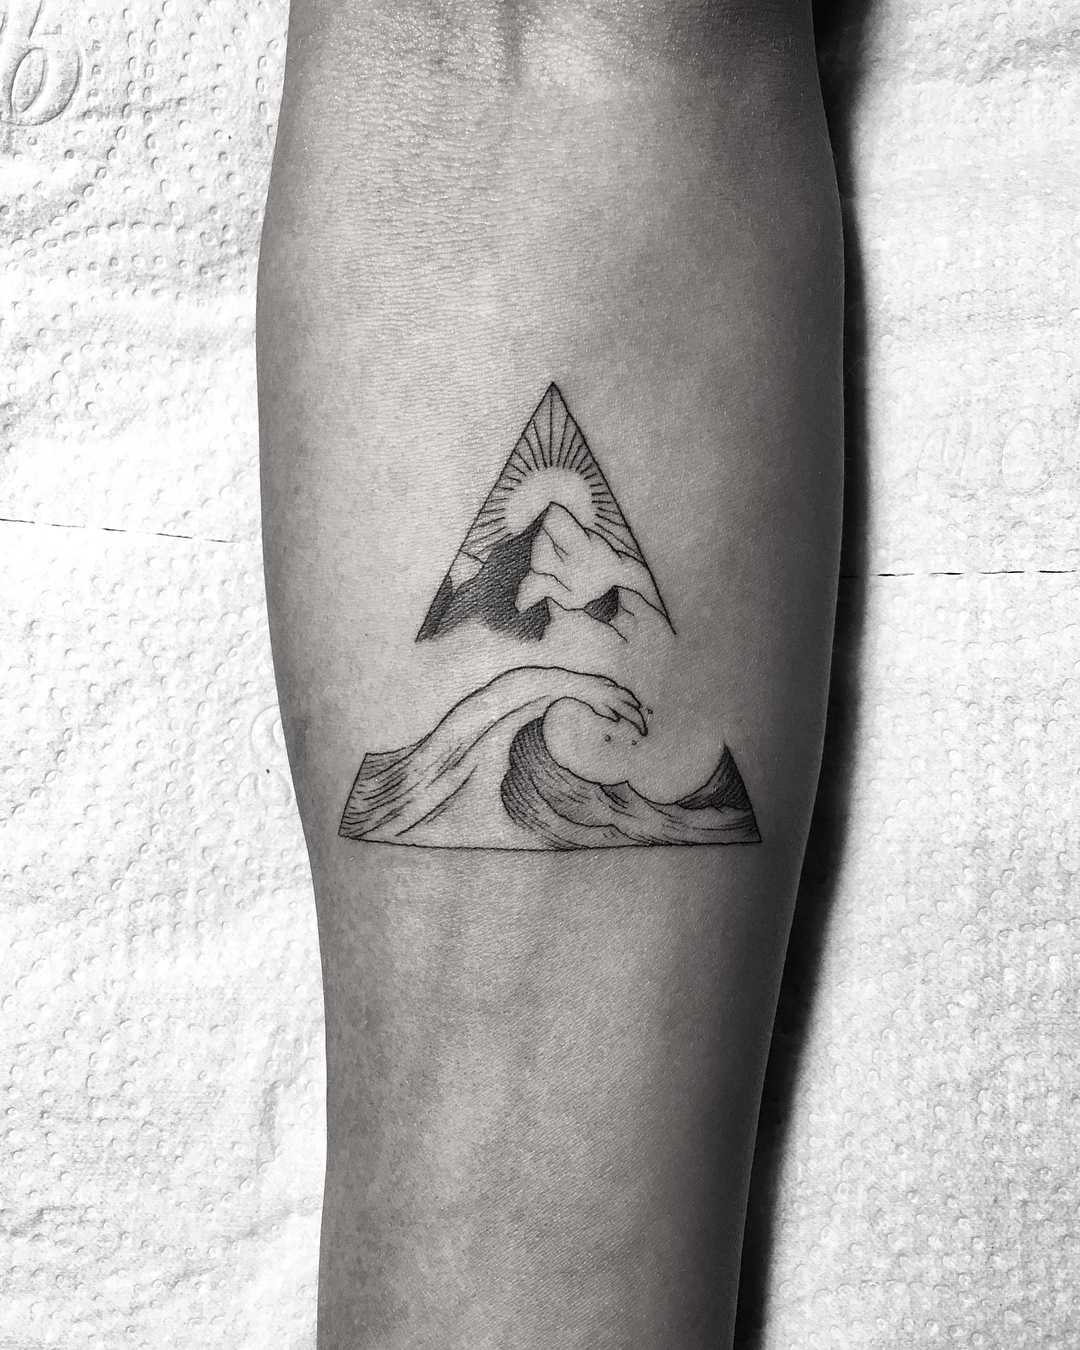 Wave and mountain in a triangle